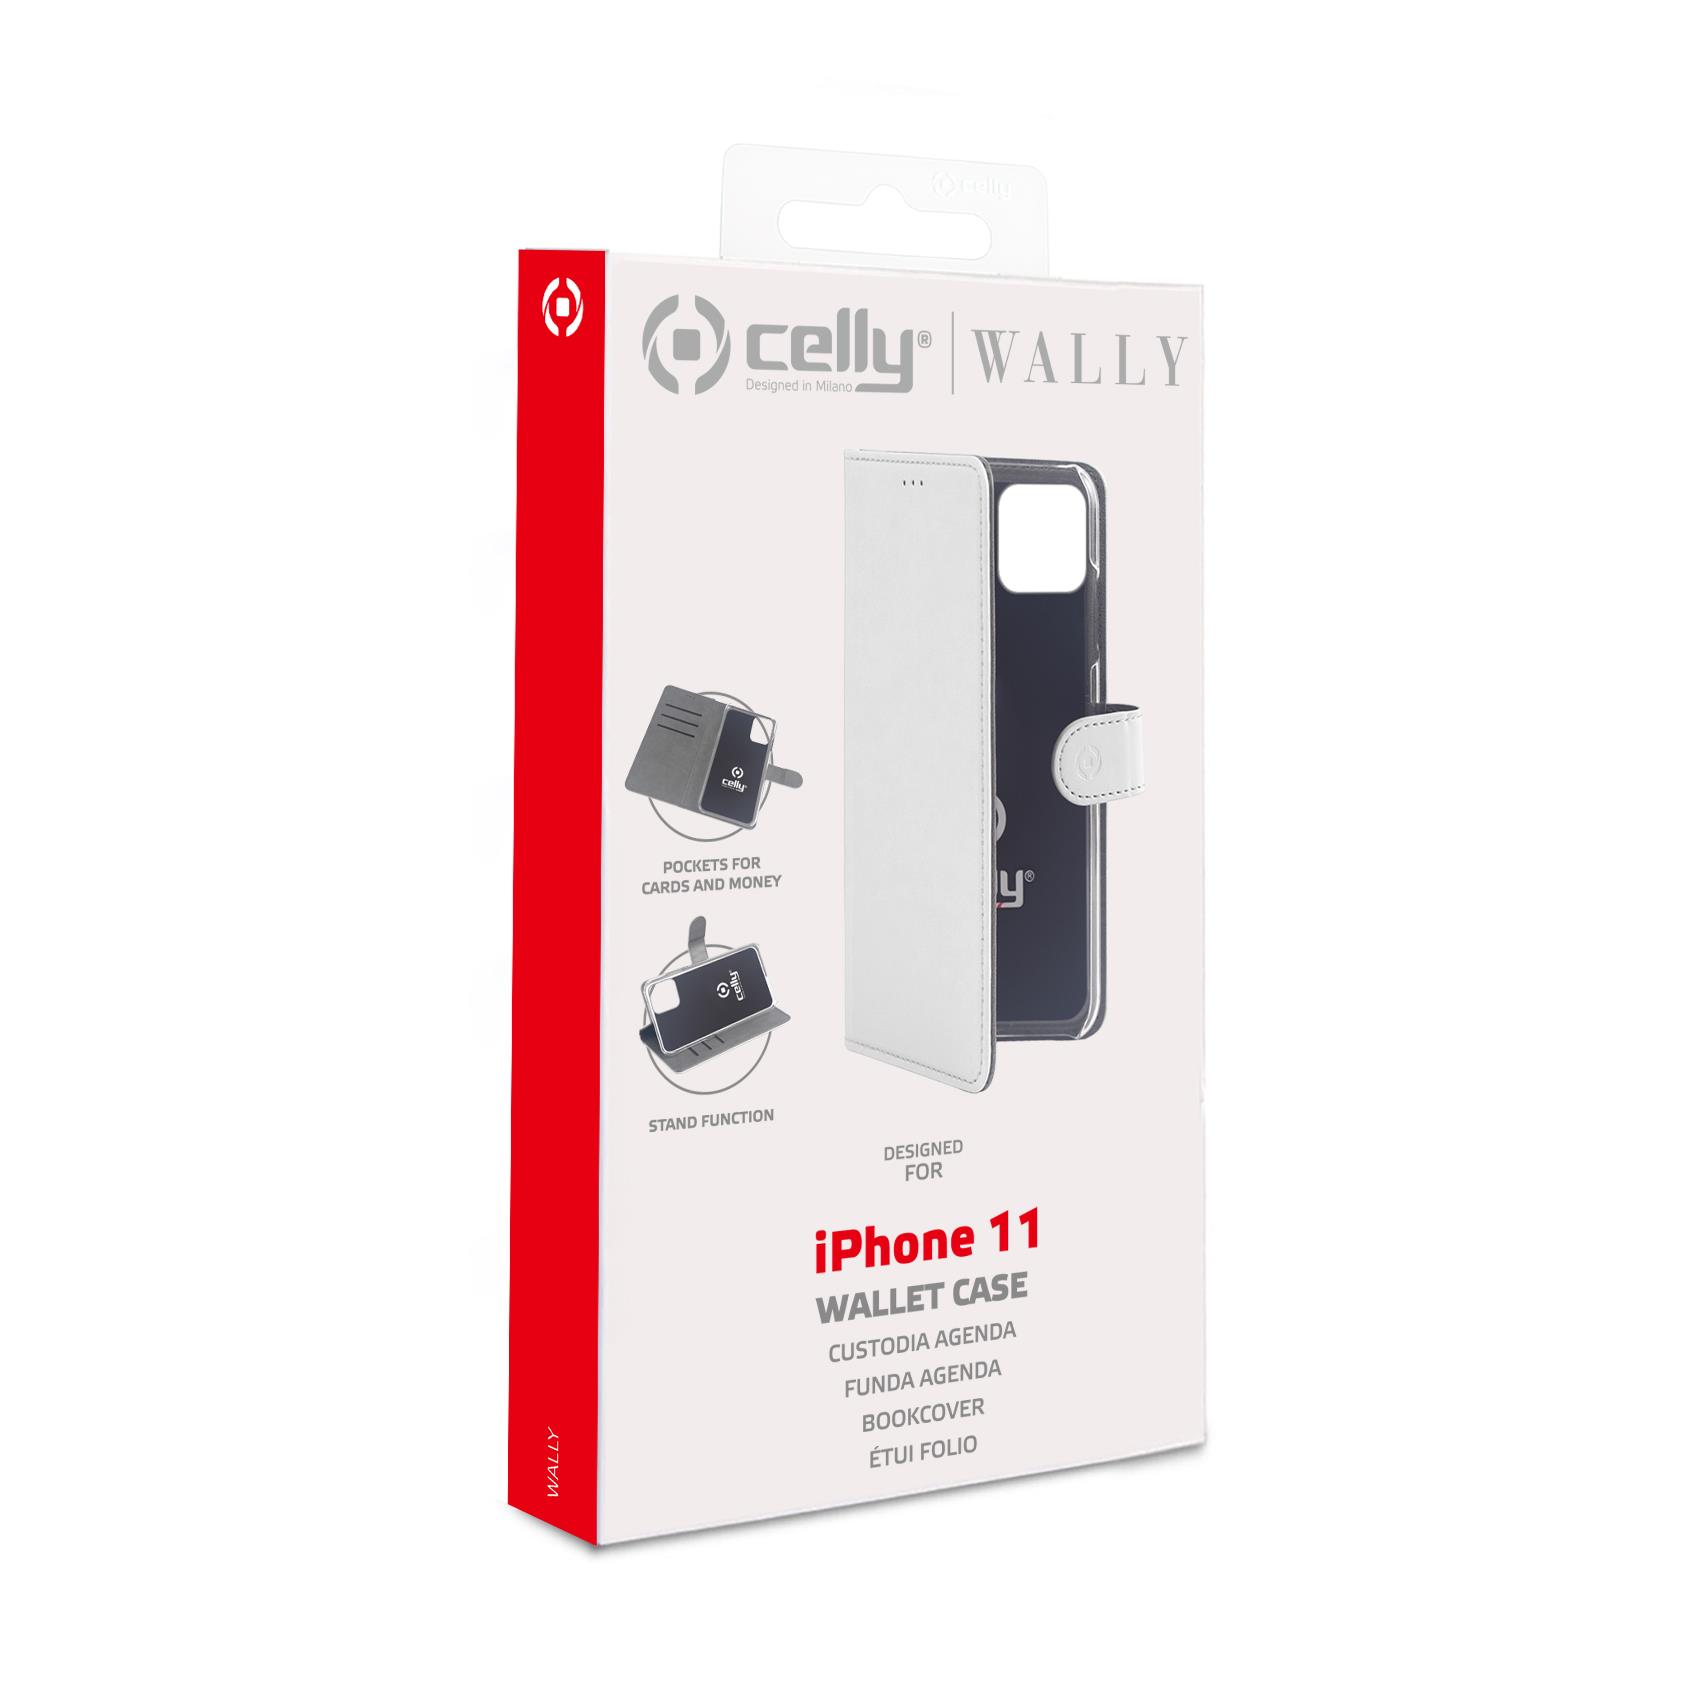 Wally Case Iphone 11 White Celly Wally1001wh 8021735752523